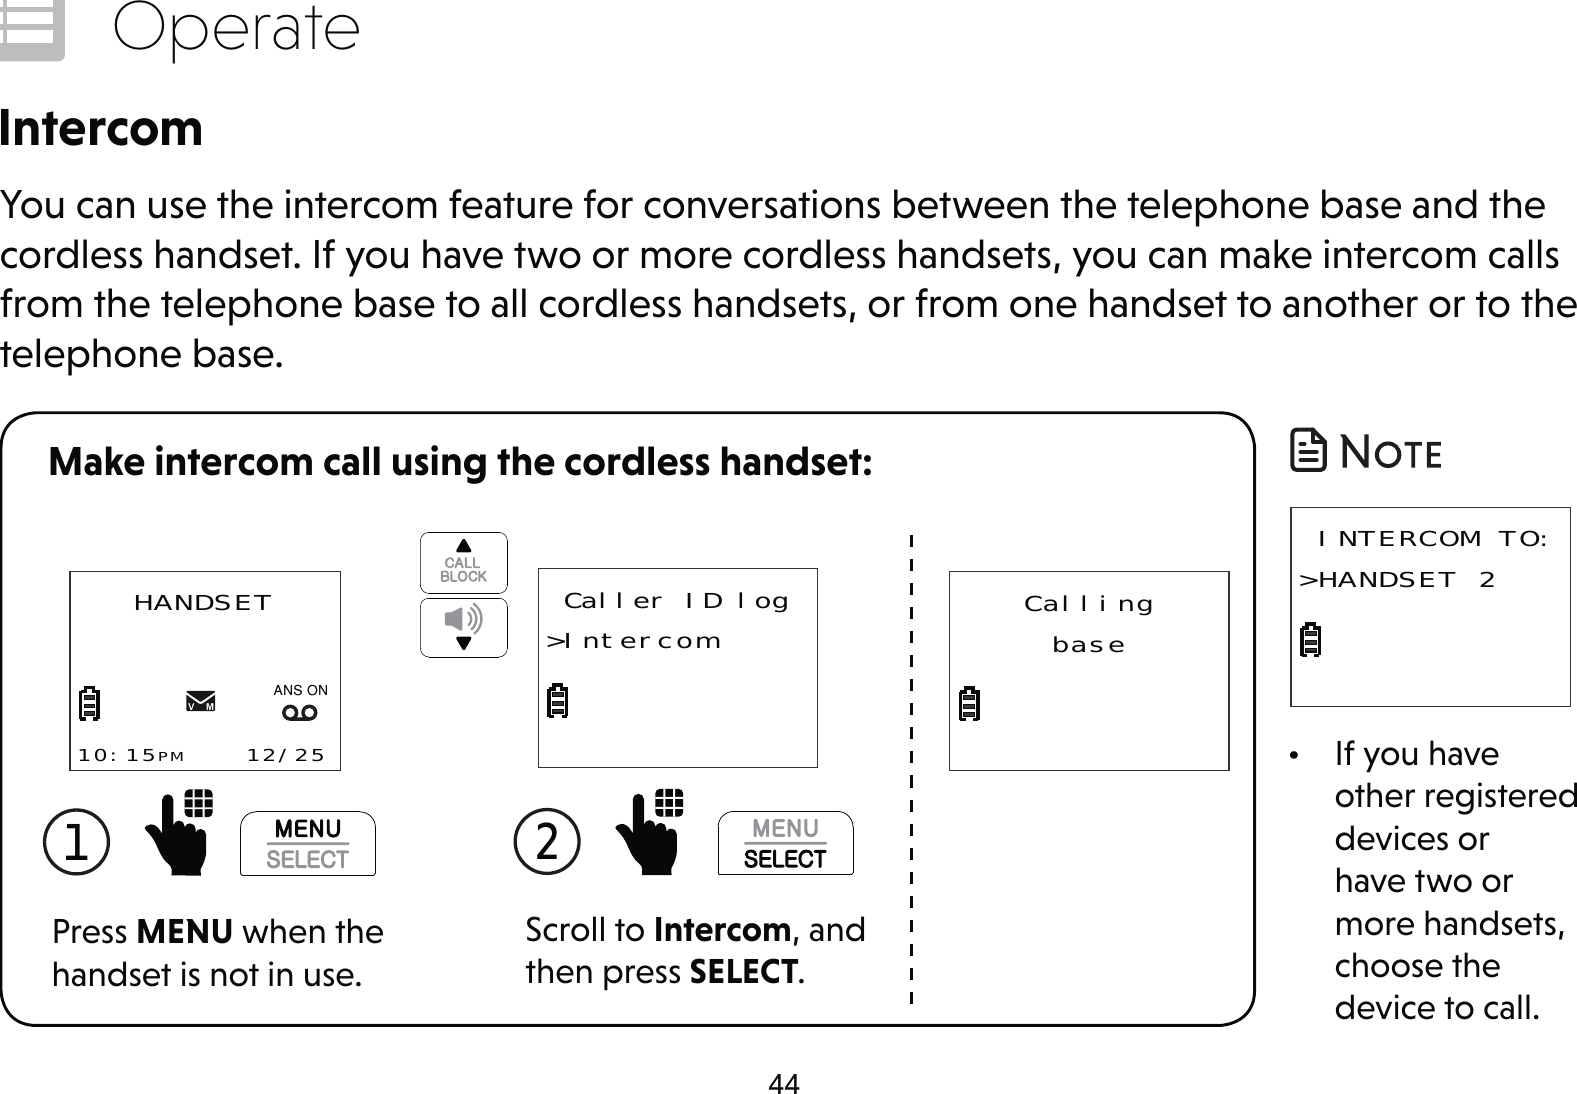 44OperateIntercomYou can use the intercom feature for conversations between the telephone base and the cordless handset. If you have two or more cordless handsets, you can make intercom calls from the telephone base to all cordless handsets, or from one handset to another or to the telephone base.1  Press MENU when the handset is not in use.HANDSET10:15PM    12/25$1621CallingbaseScroll to Intercom, and then press SELECT.2  Caller ID log&gt;IntercomMake intercom call using the cordless handset:•  If you have other registered devices or have two or more handsets, choose the device to call. INTERCOM TO:&gt;HANDSET 2 